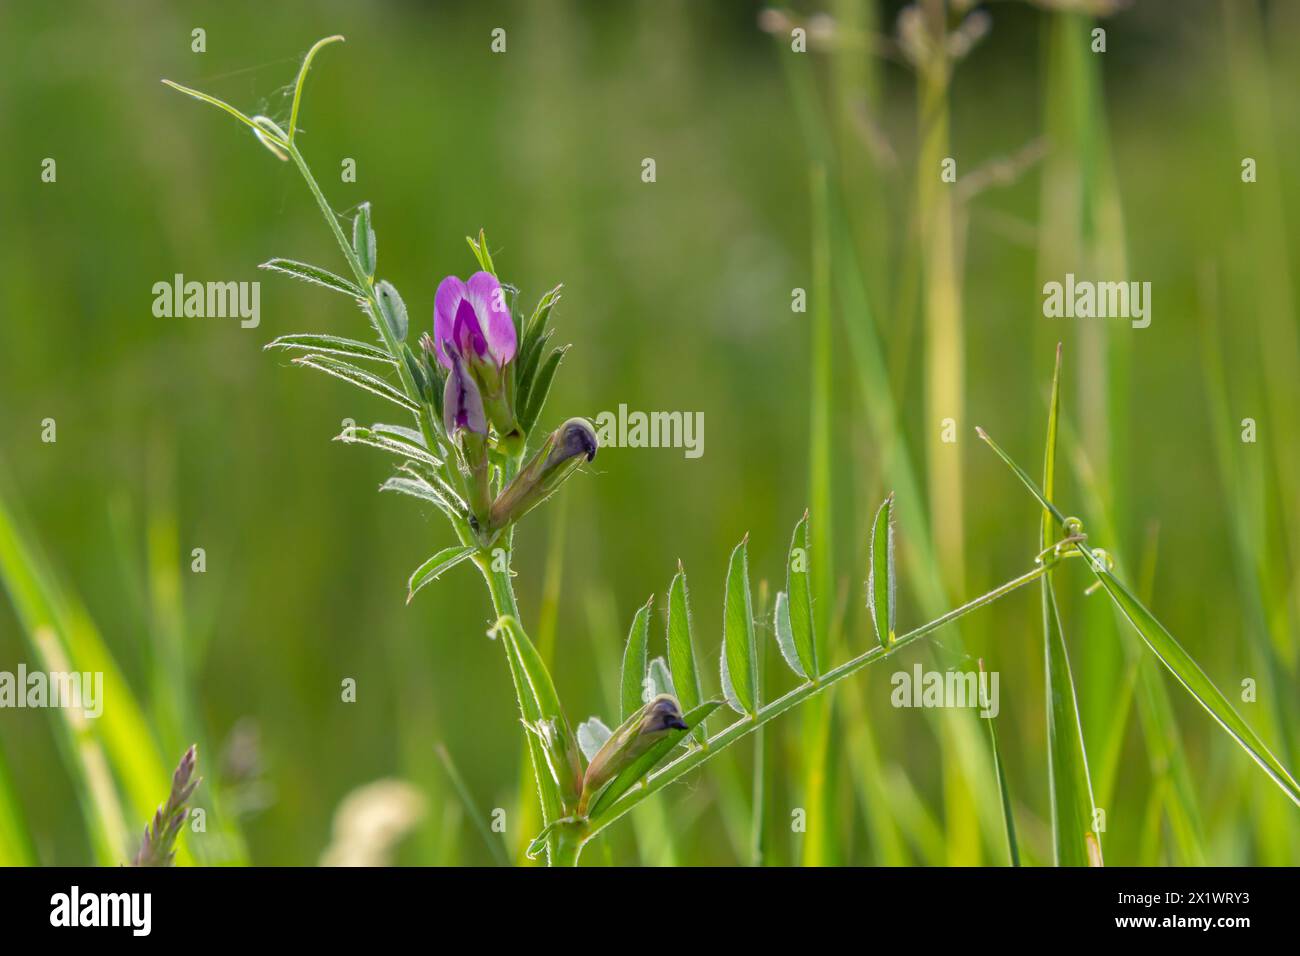 Purple pea flower of Common Vetch vicia sativa or Tare weed is a nitrogen fixing leguminous annual herb grown in pastures to improve fertility. Stock Photo